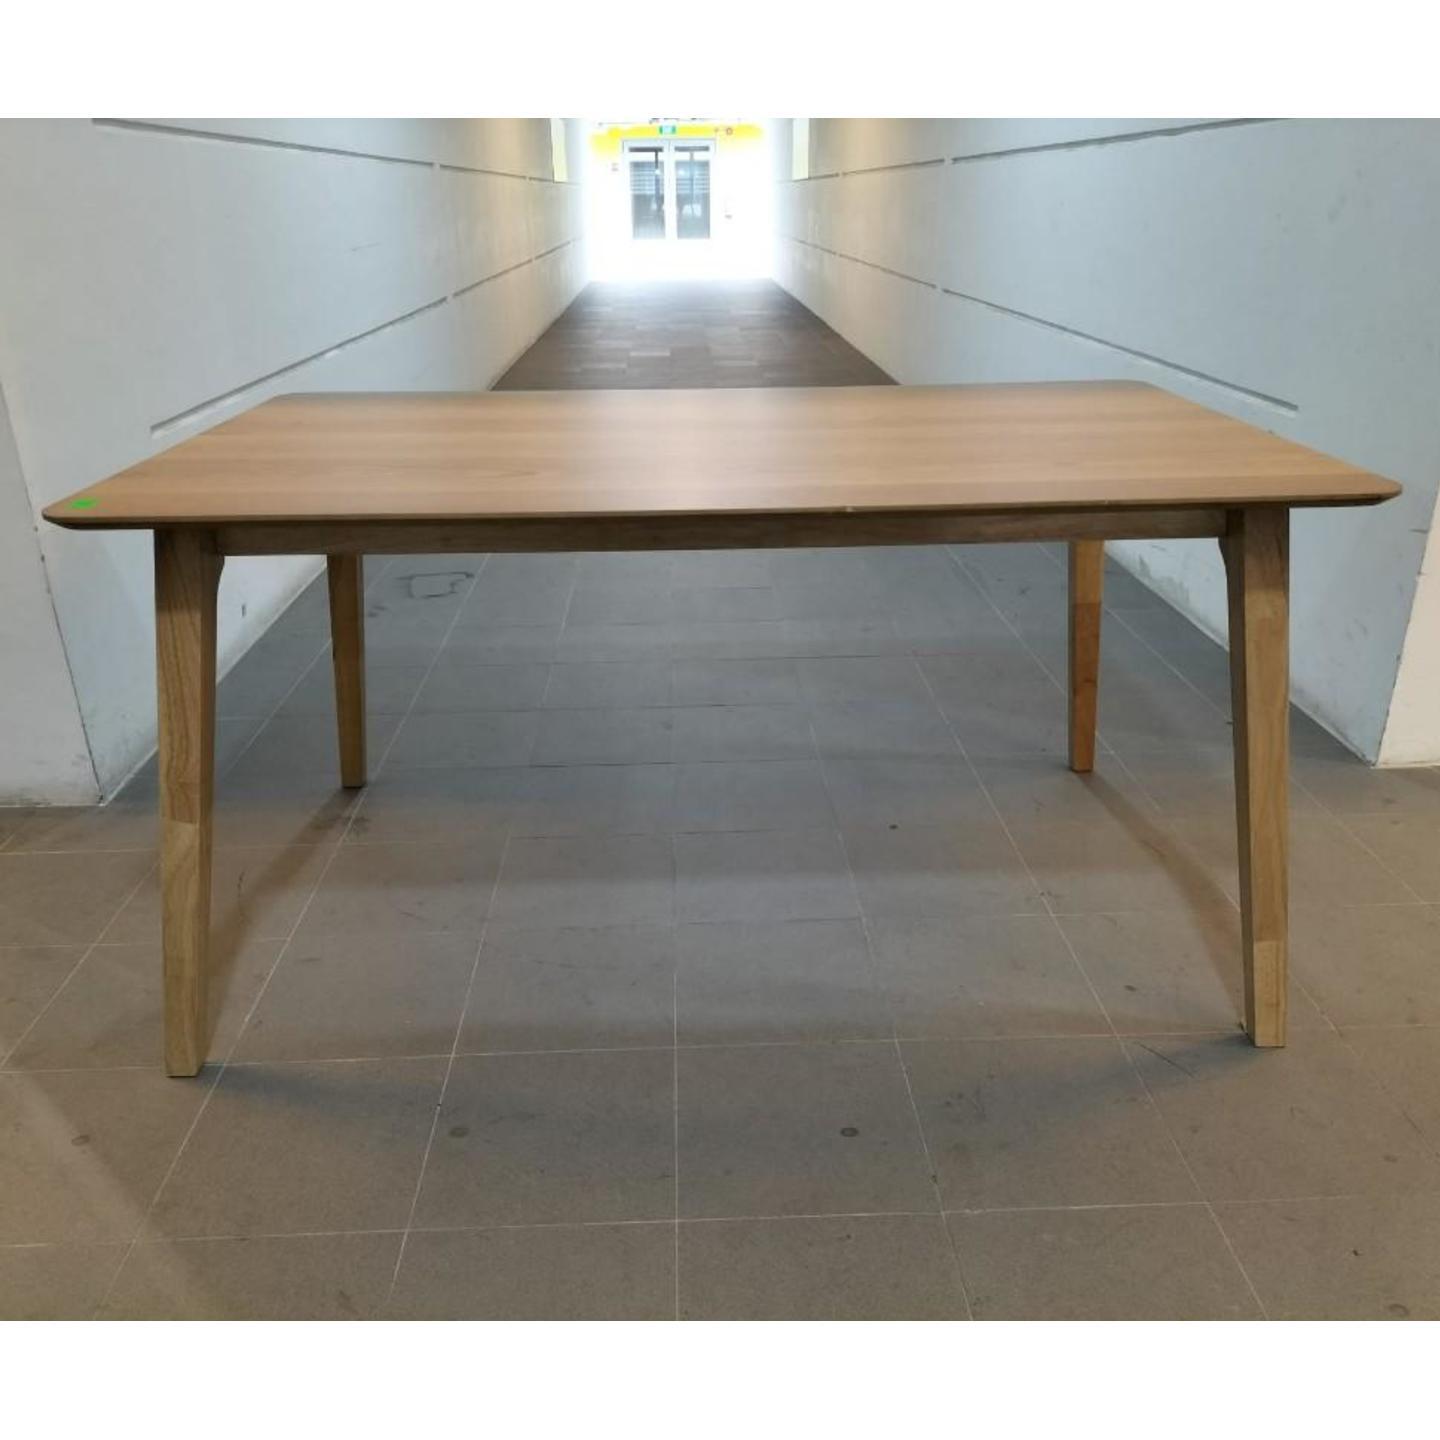 RACH Large Dining Table in OAK